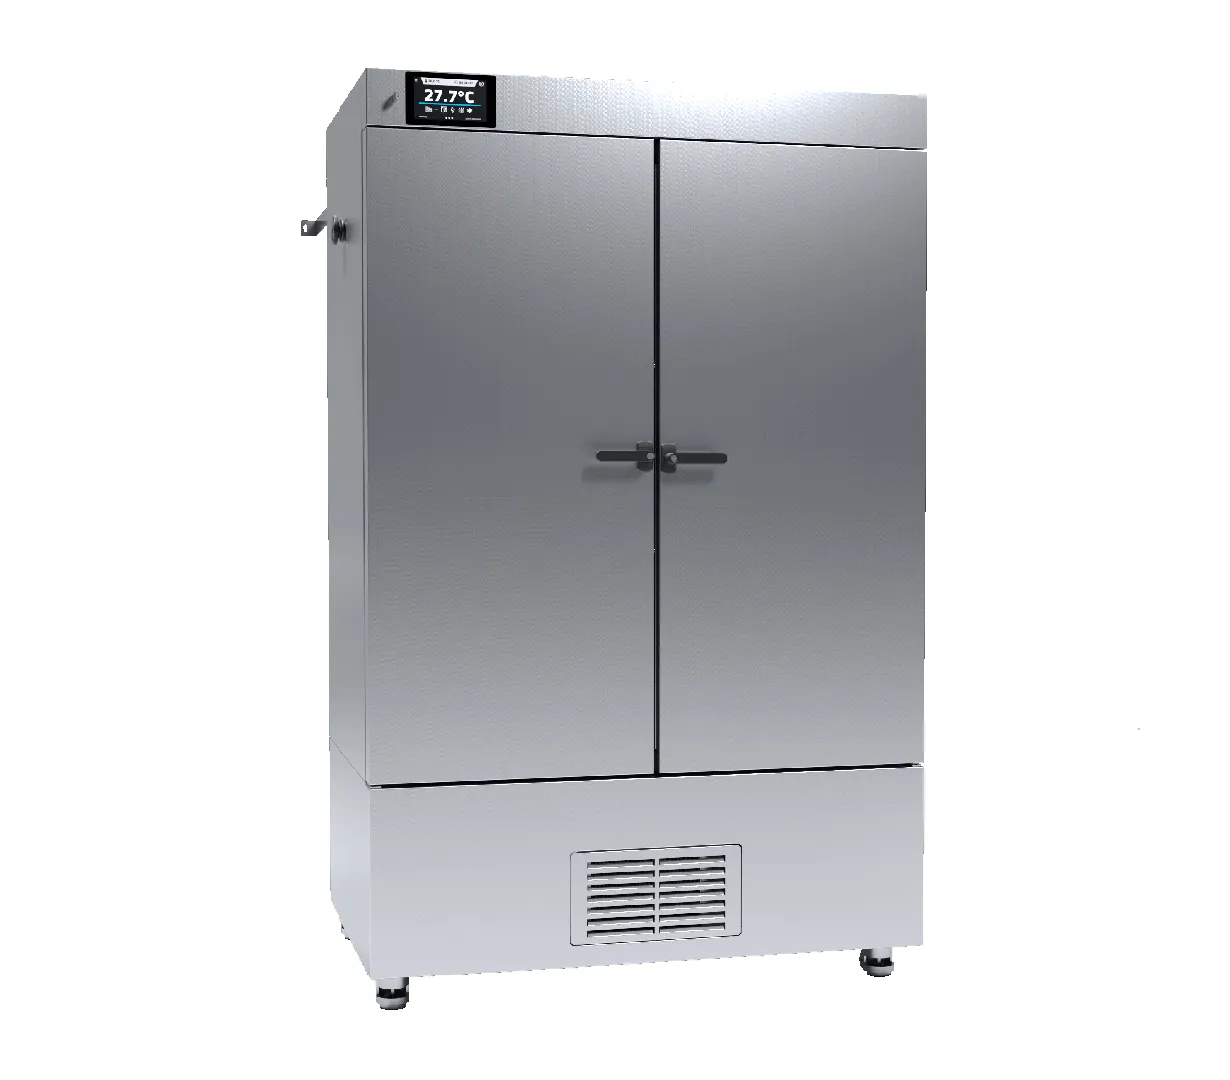 climatic-chamber-with-phytotron-system-kk-fit-p-750-smart-pro-inox-c.webp